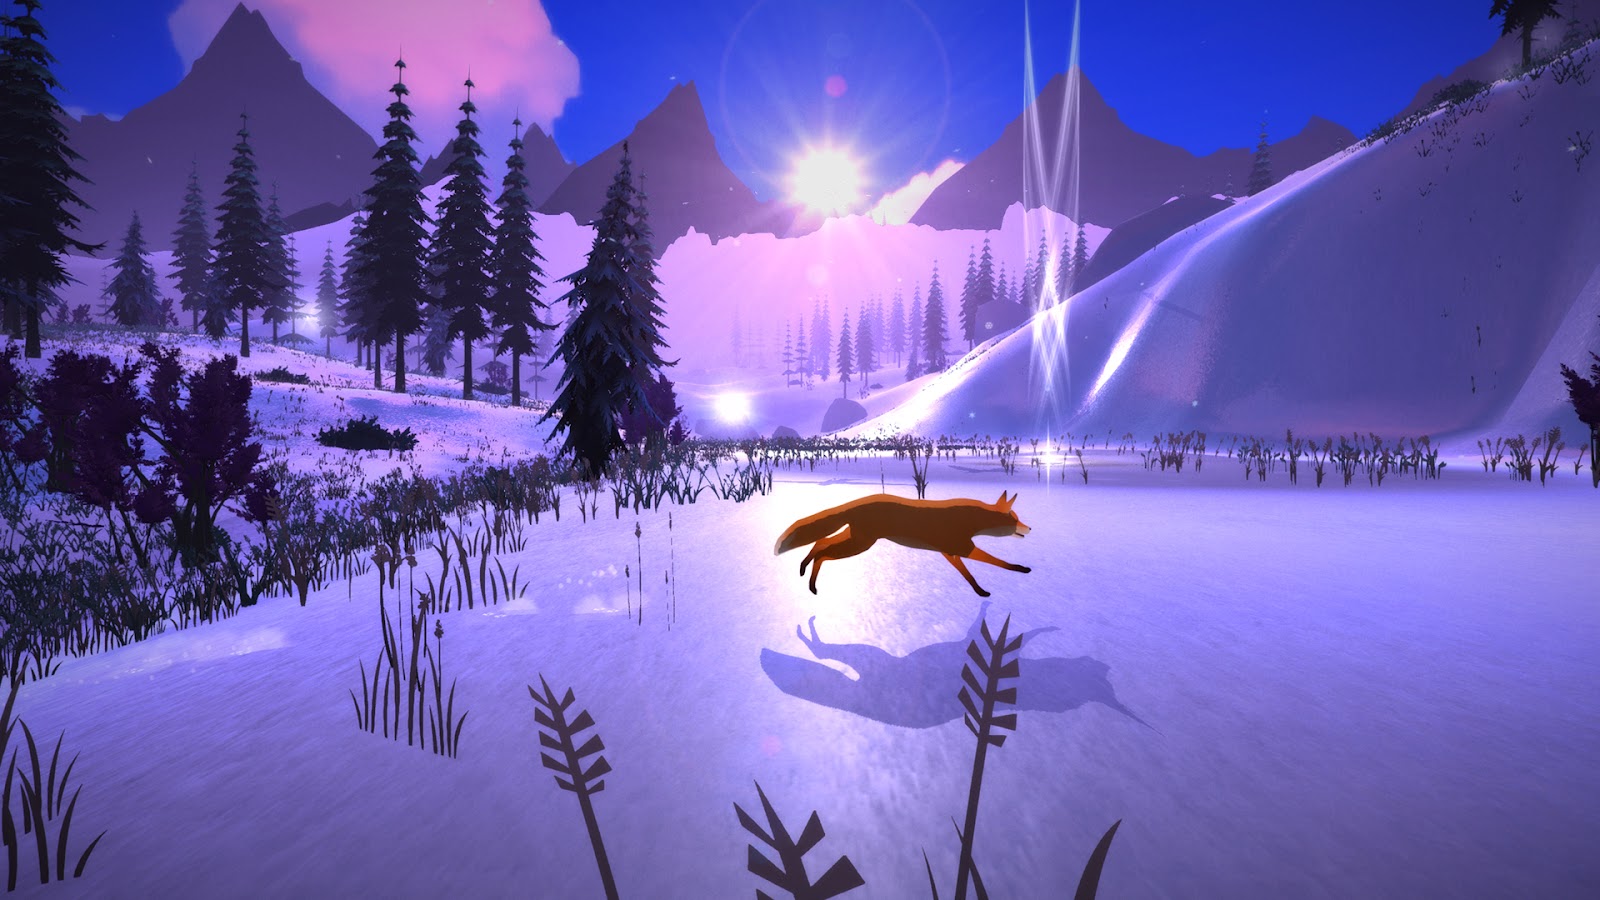 A leaping fox in a snow filled landscape